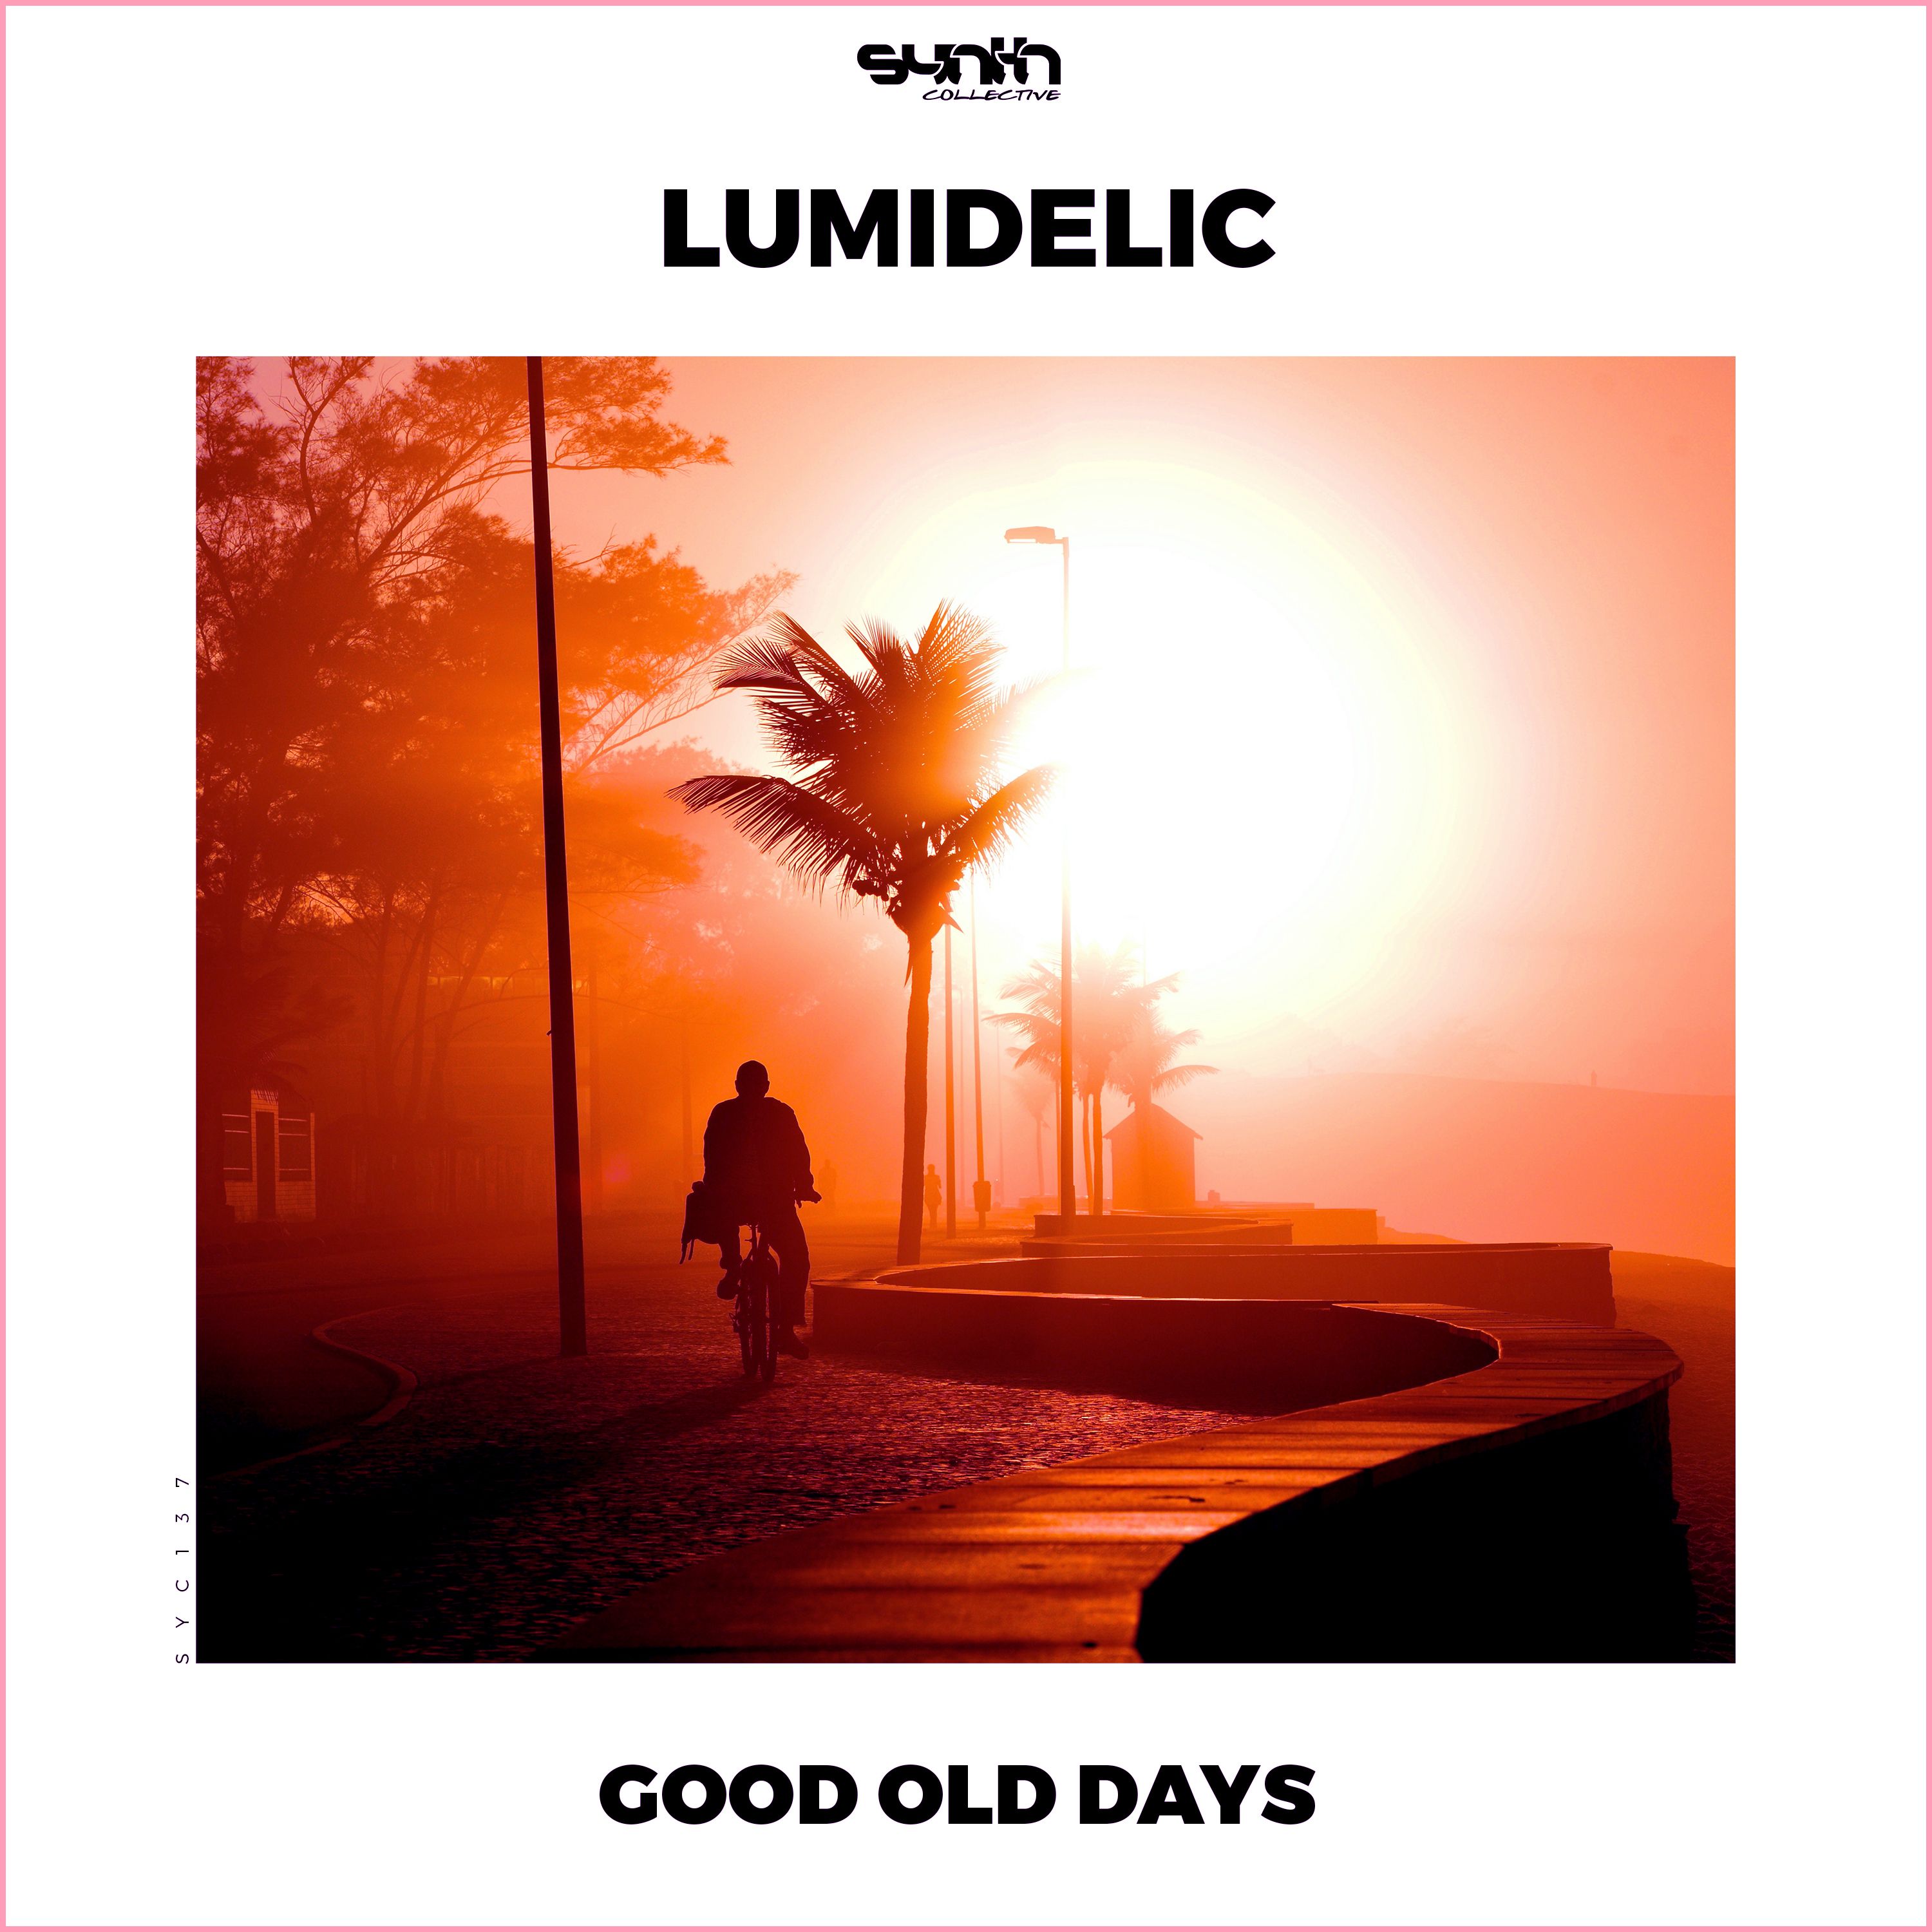 Pobierać Lumidelic - Good Old Days [Synth Collective]